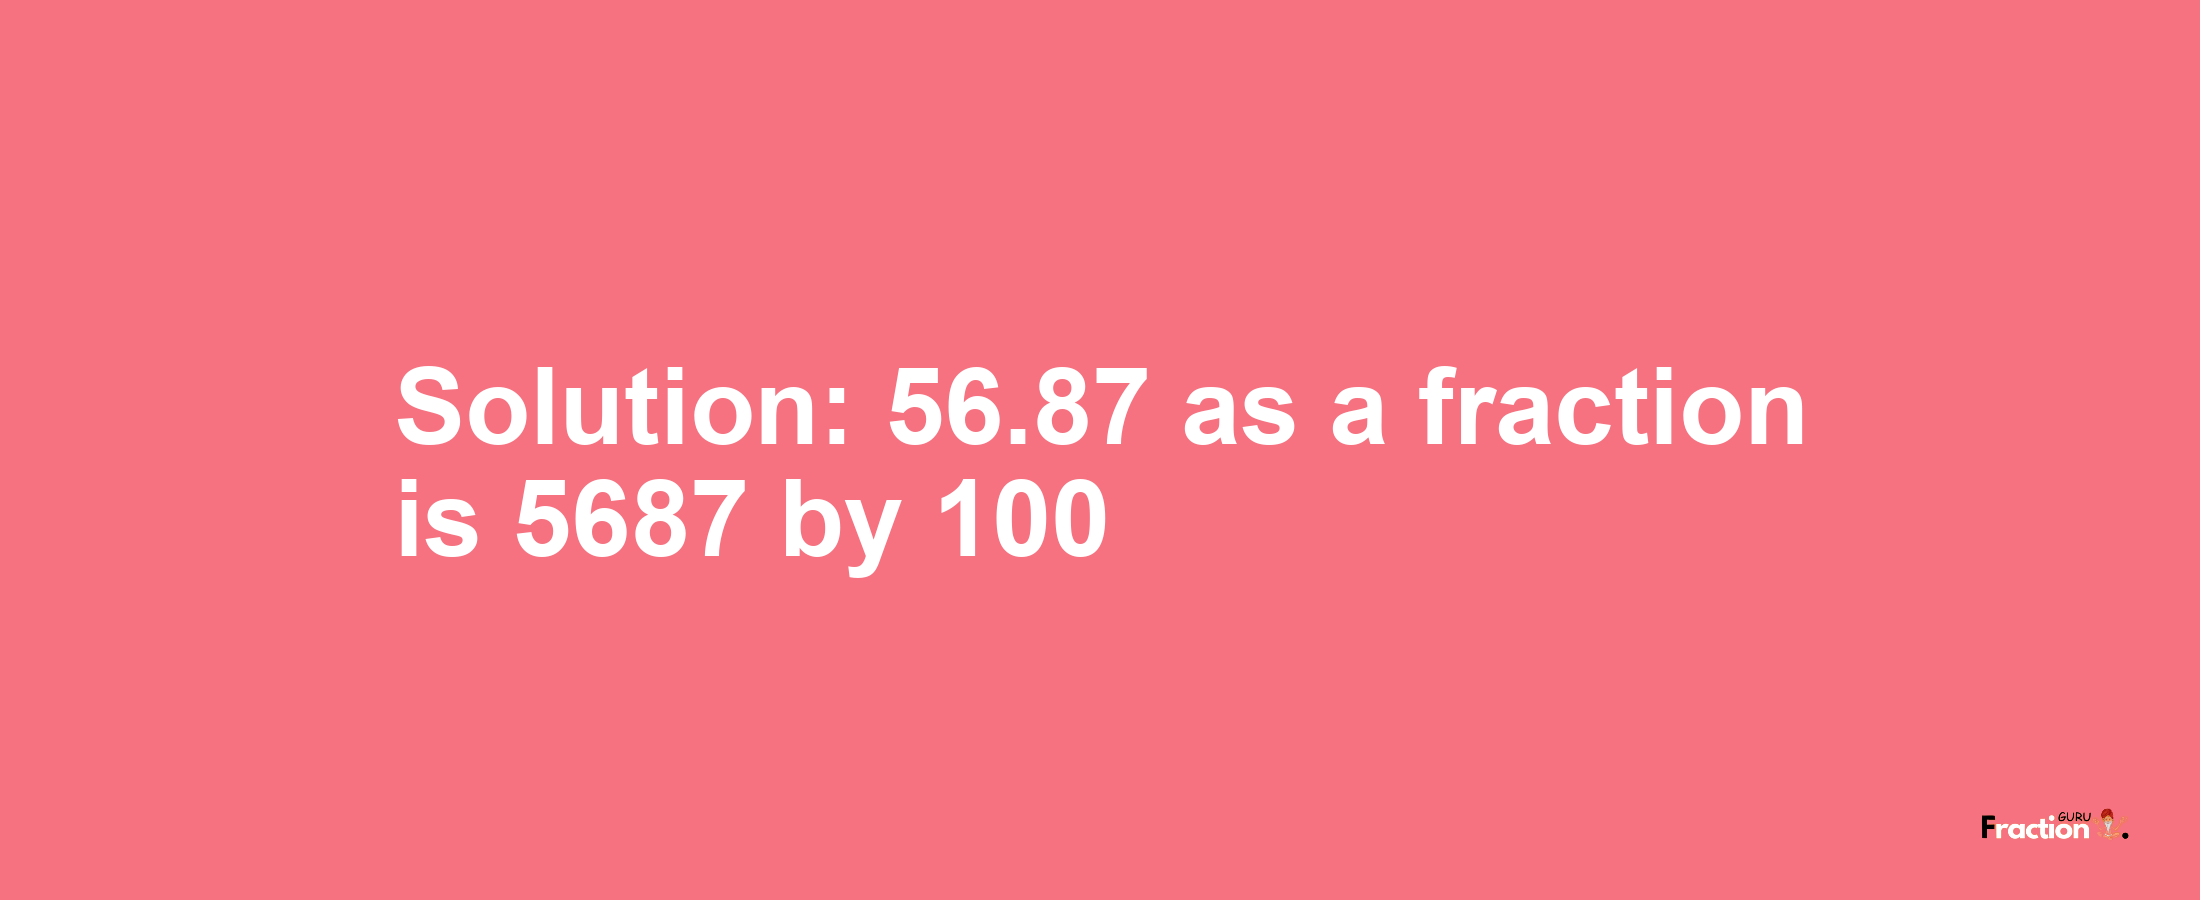 Solution:56.87 as a fraction is 5687/100